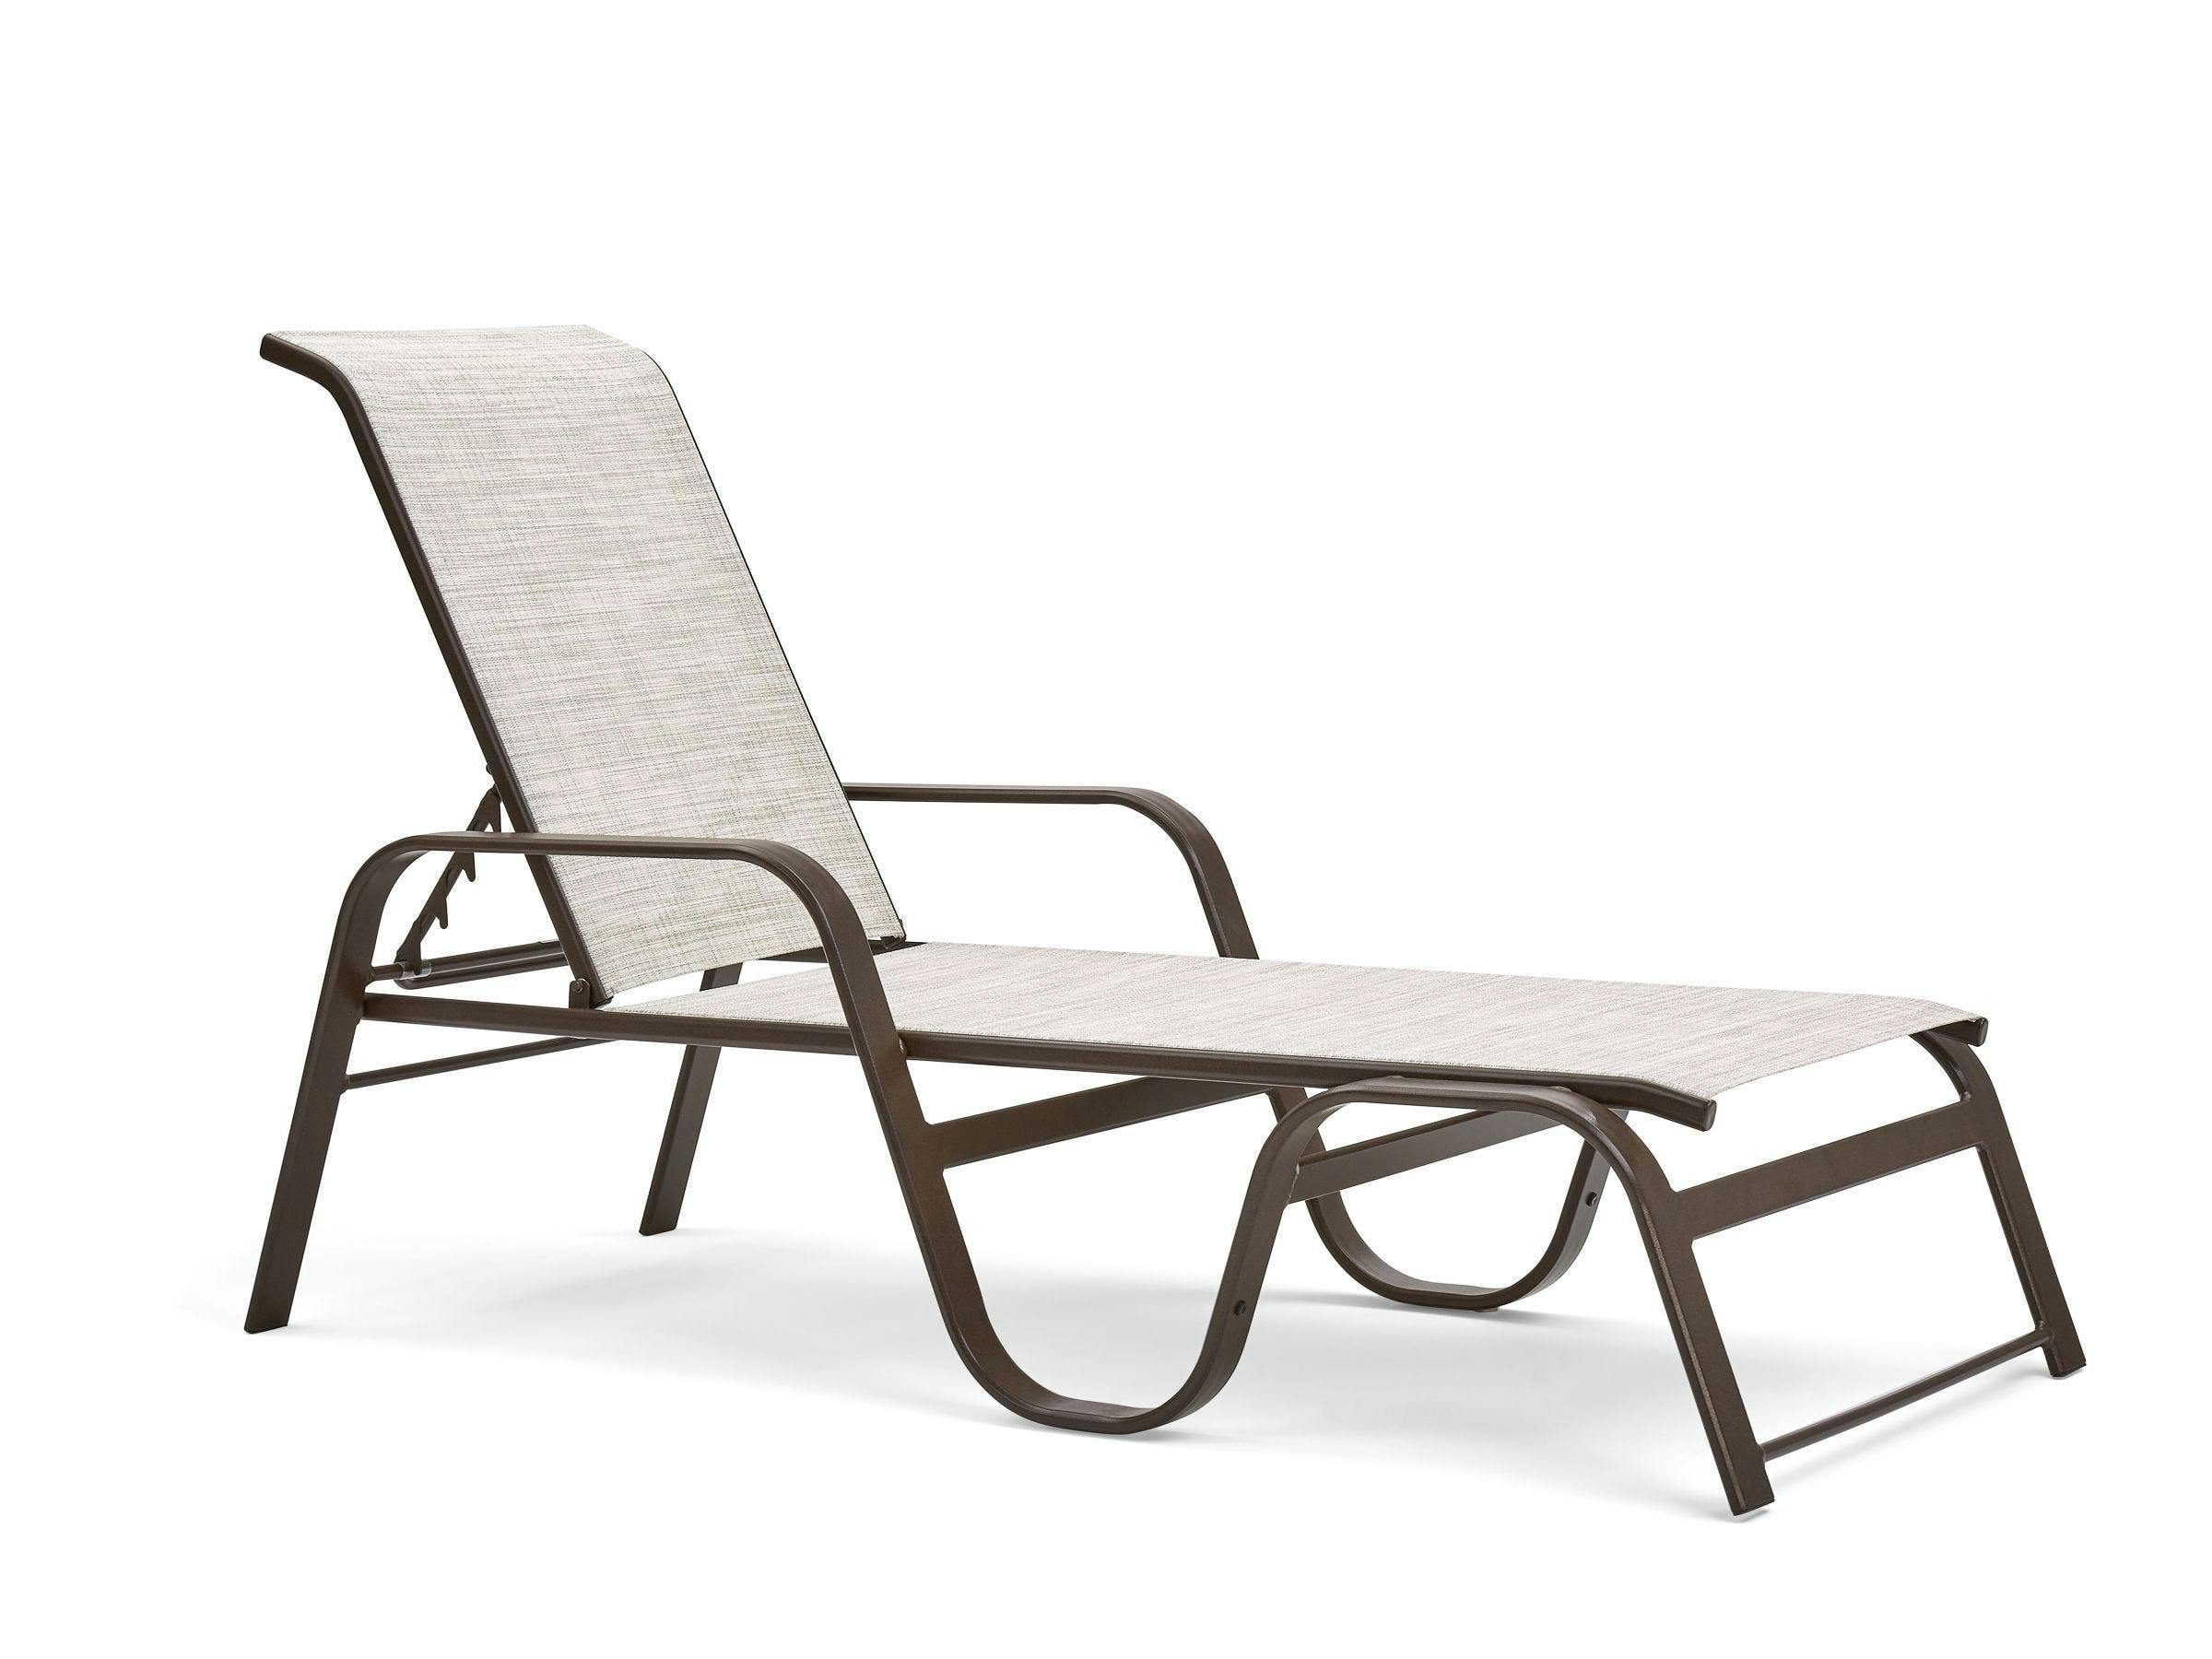 Key West Sling Stacking Adjustable Chaise